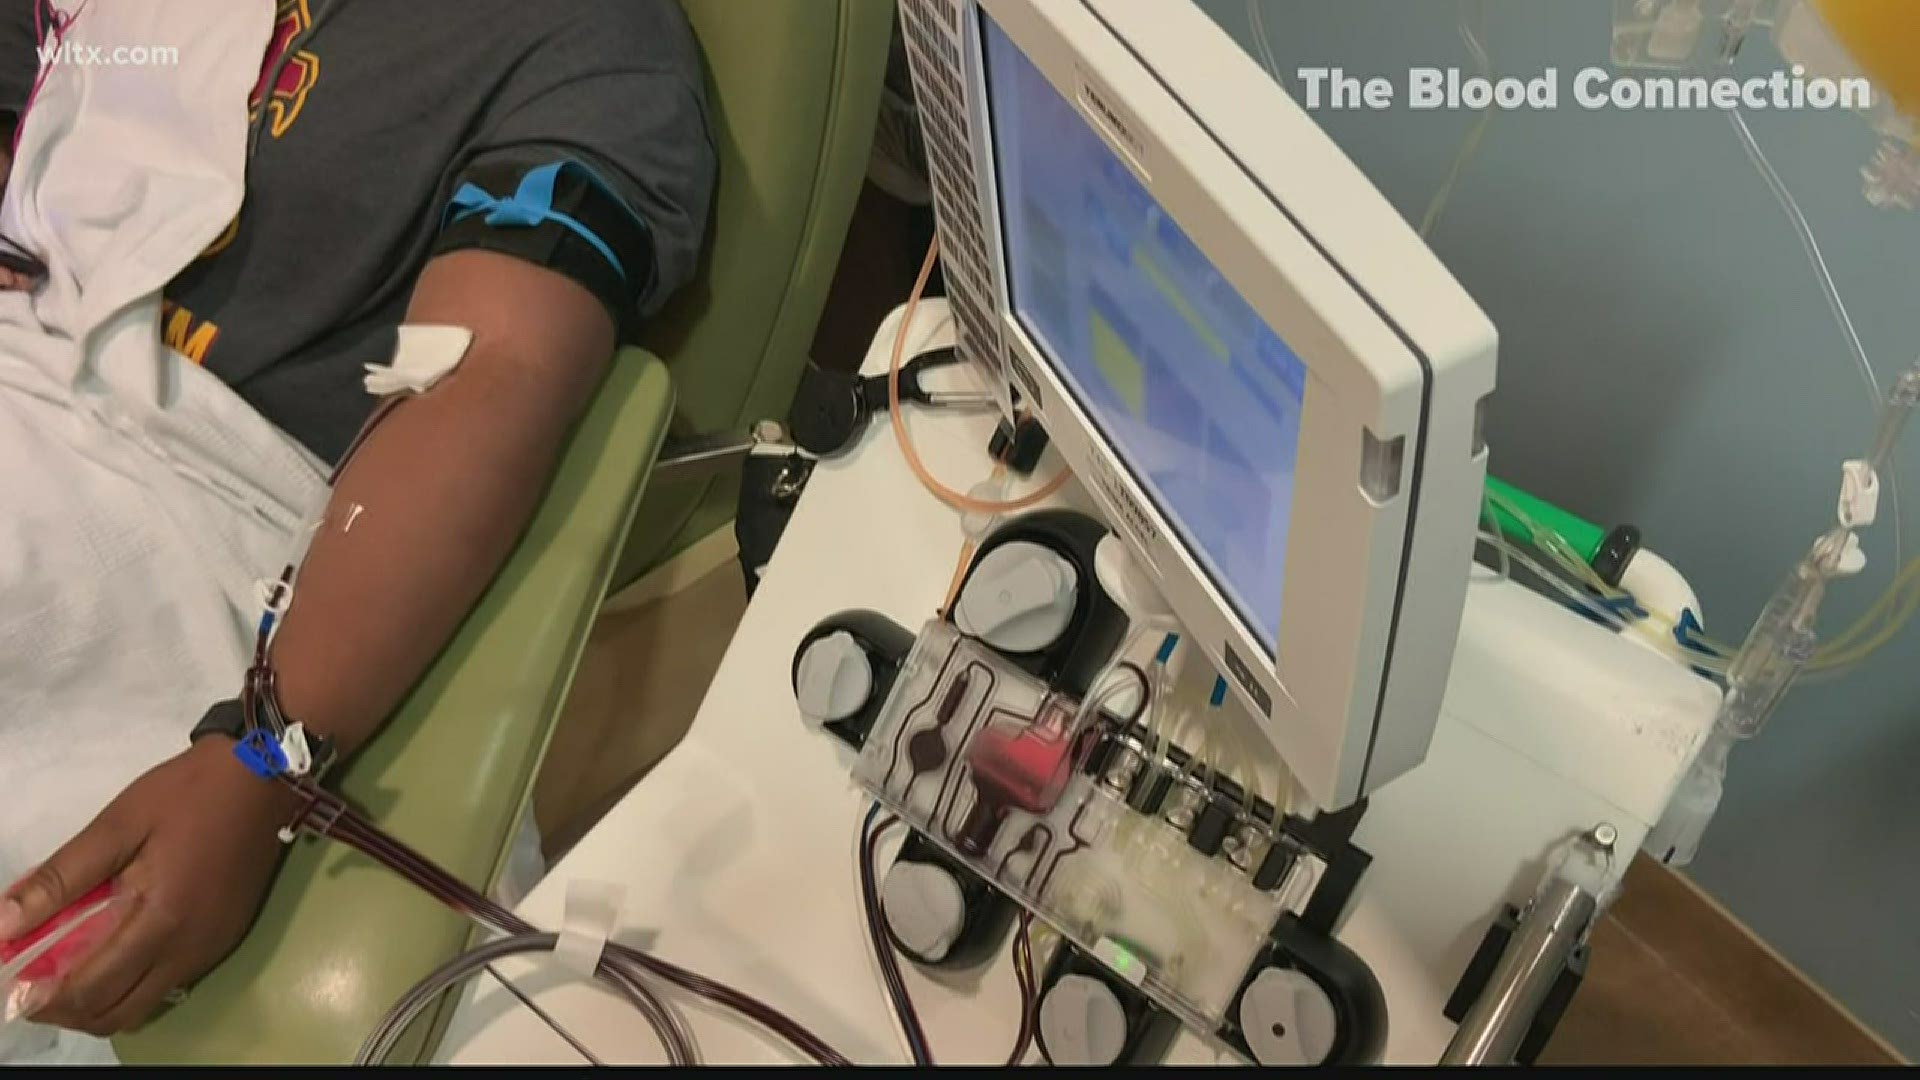 UofSC The Blood Connection to receive plasma